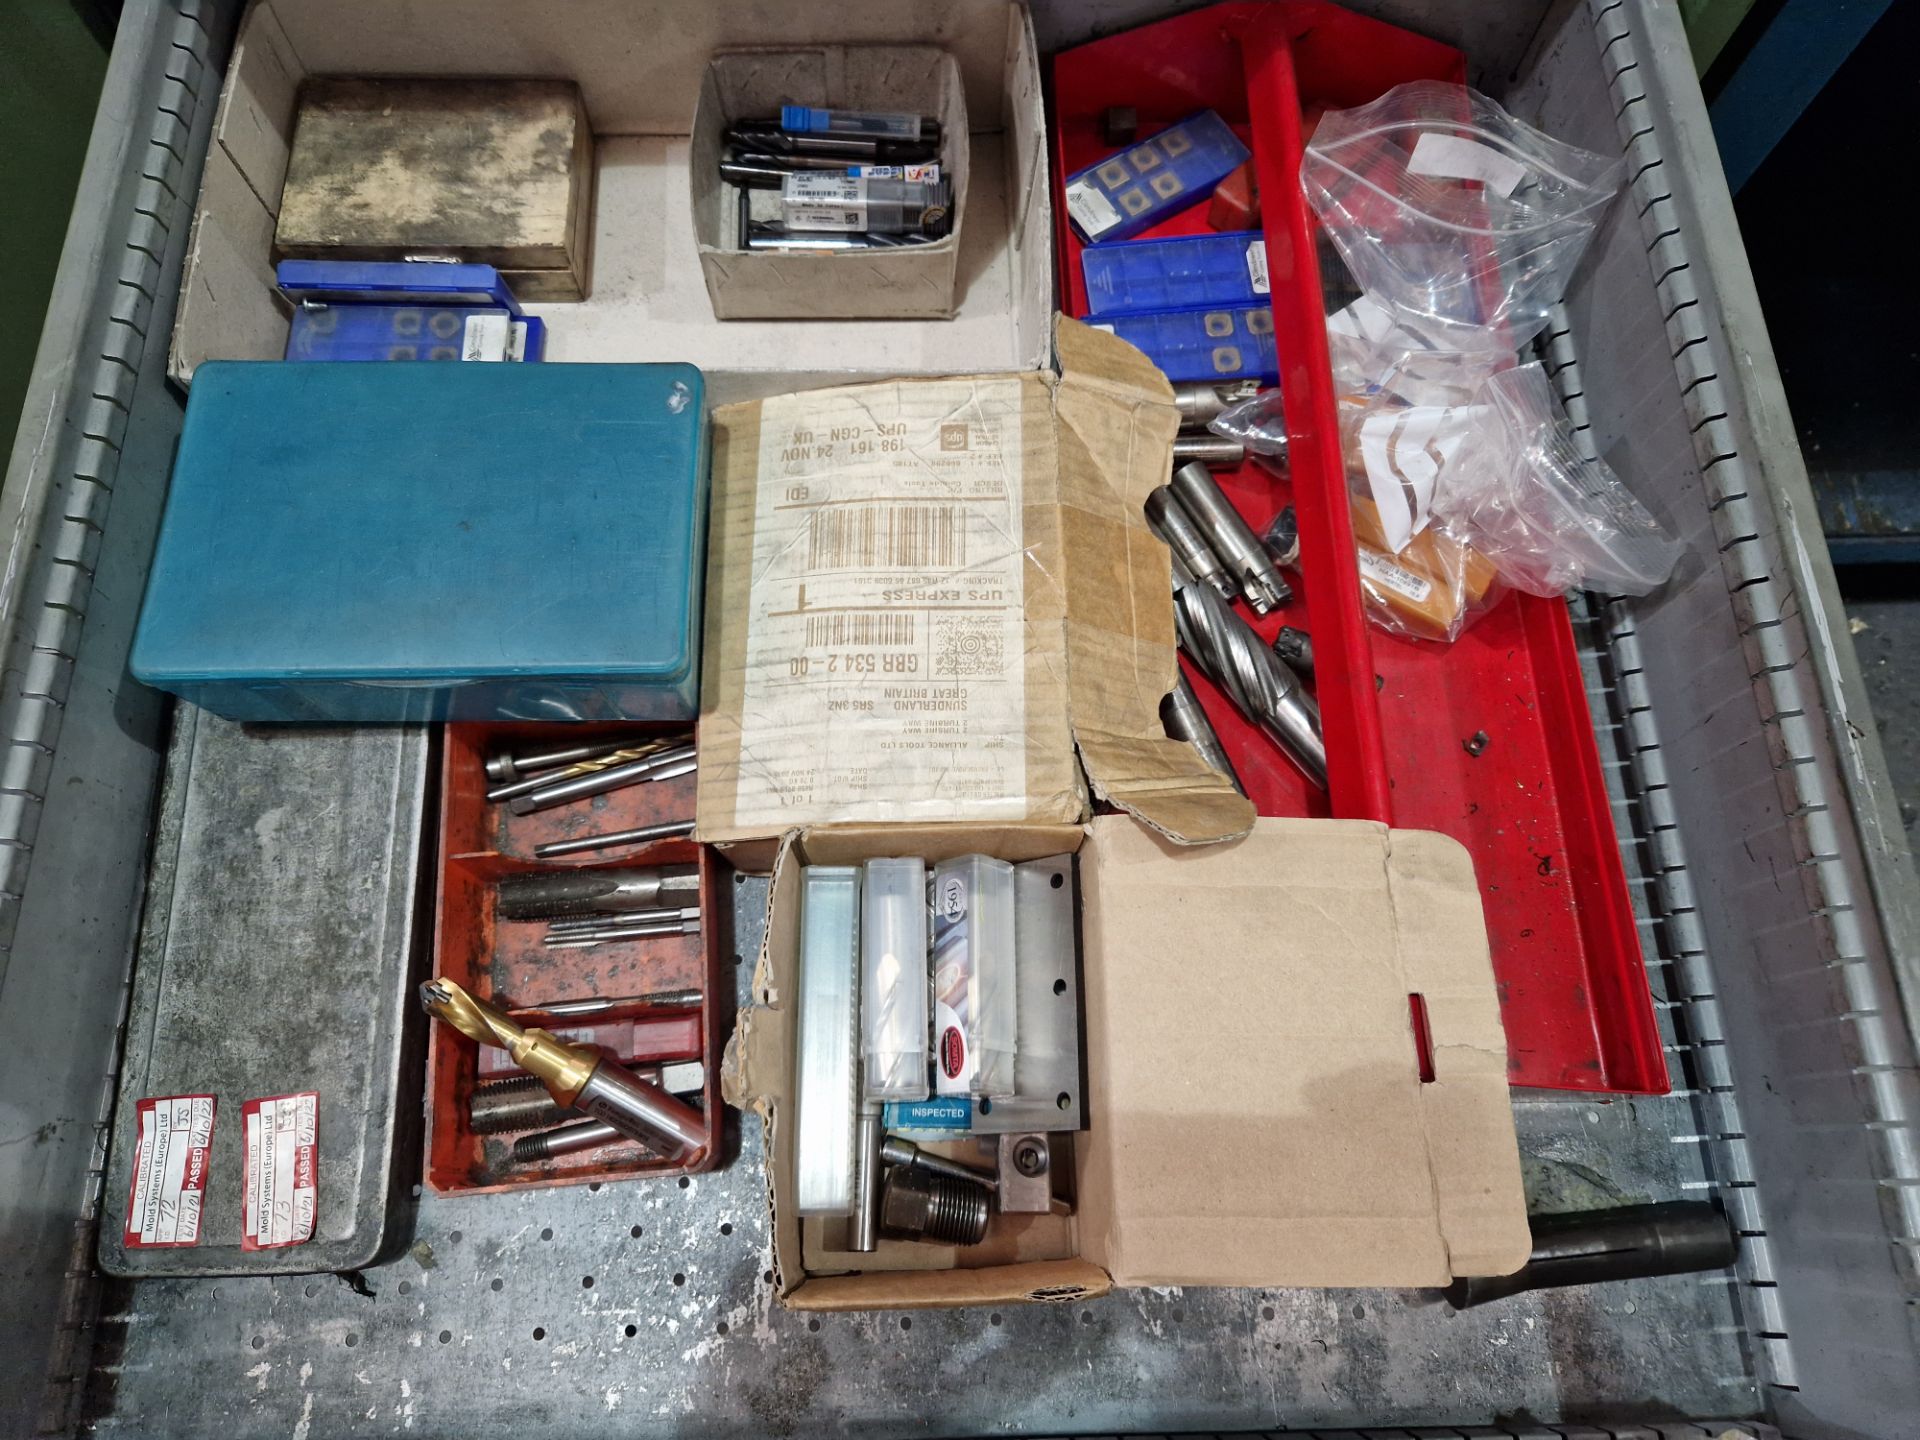 Contents to Drawer including Drill Bits, Reamer, etc